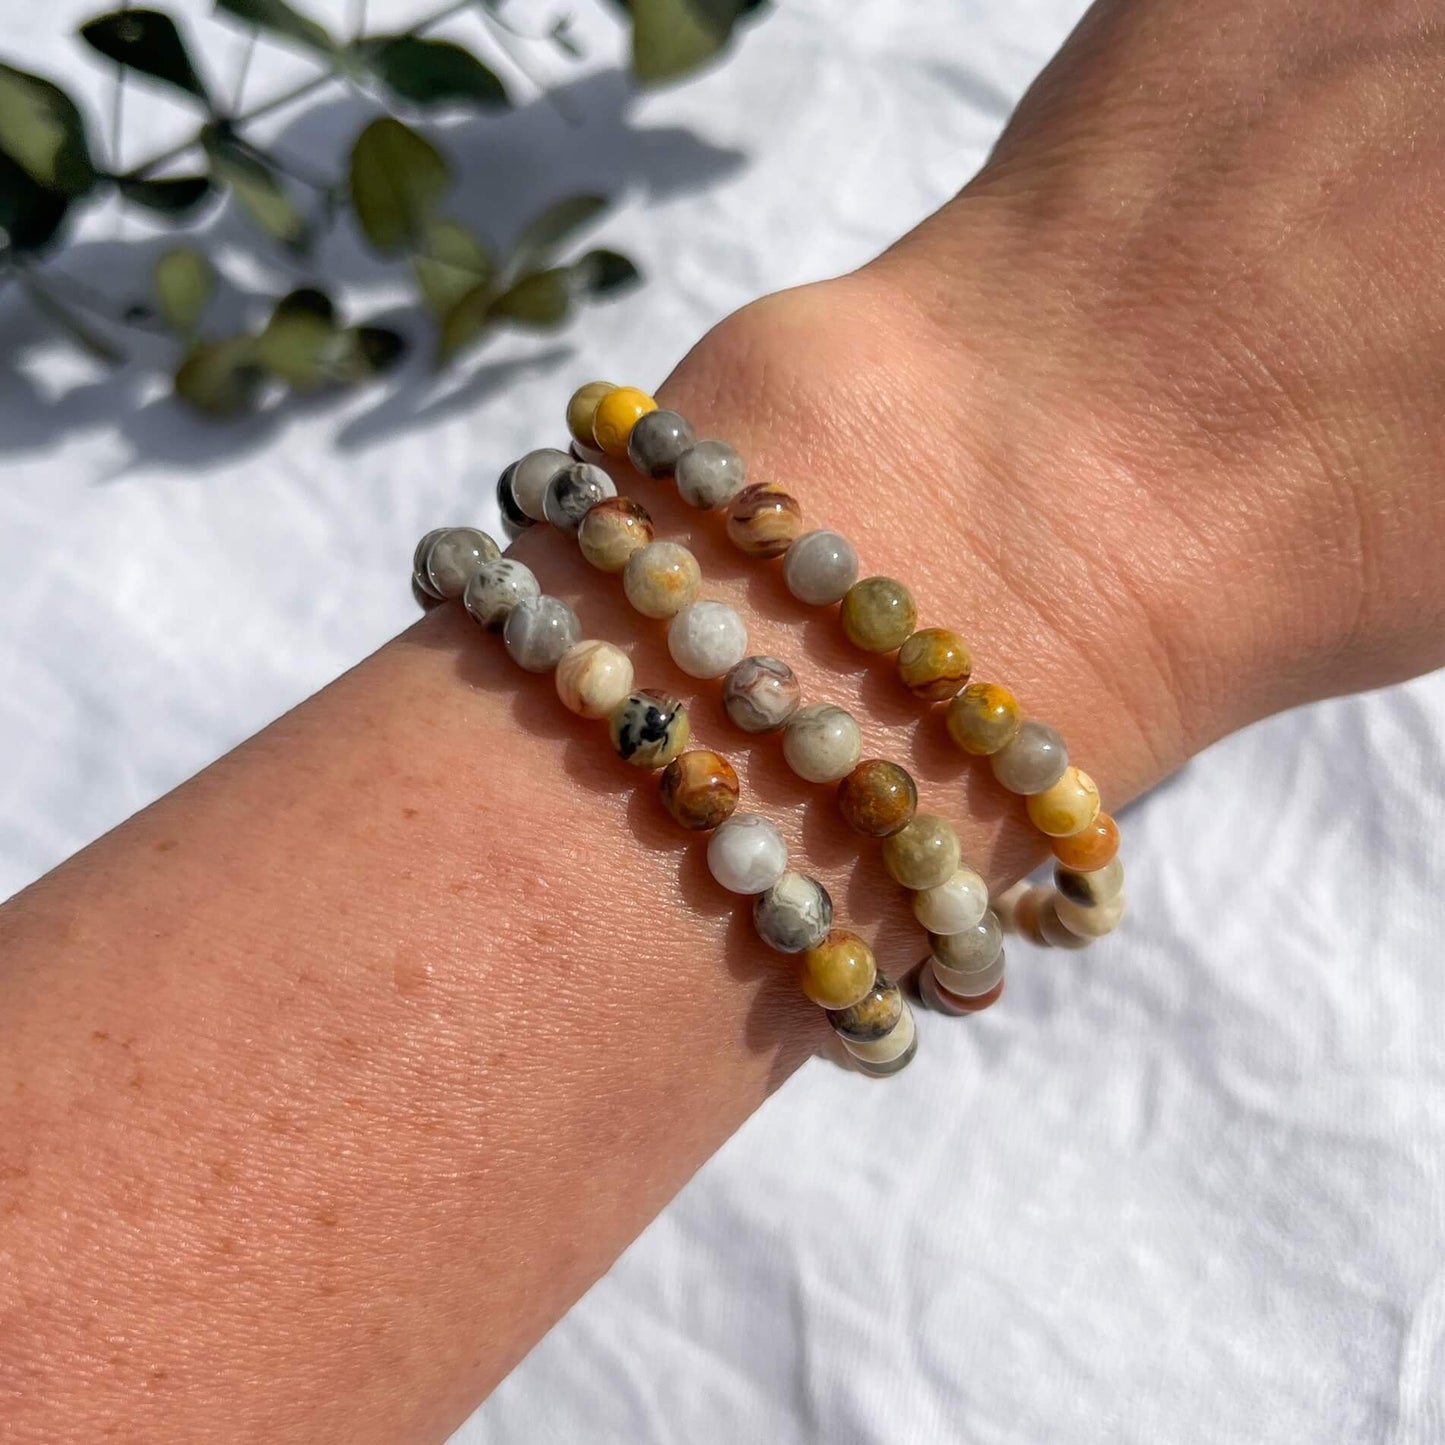 A woman's arm with 3 yellow, white & amber coloured crazy lace agate crystal bead bracelets